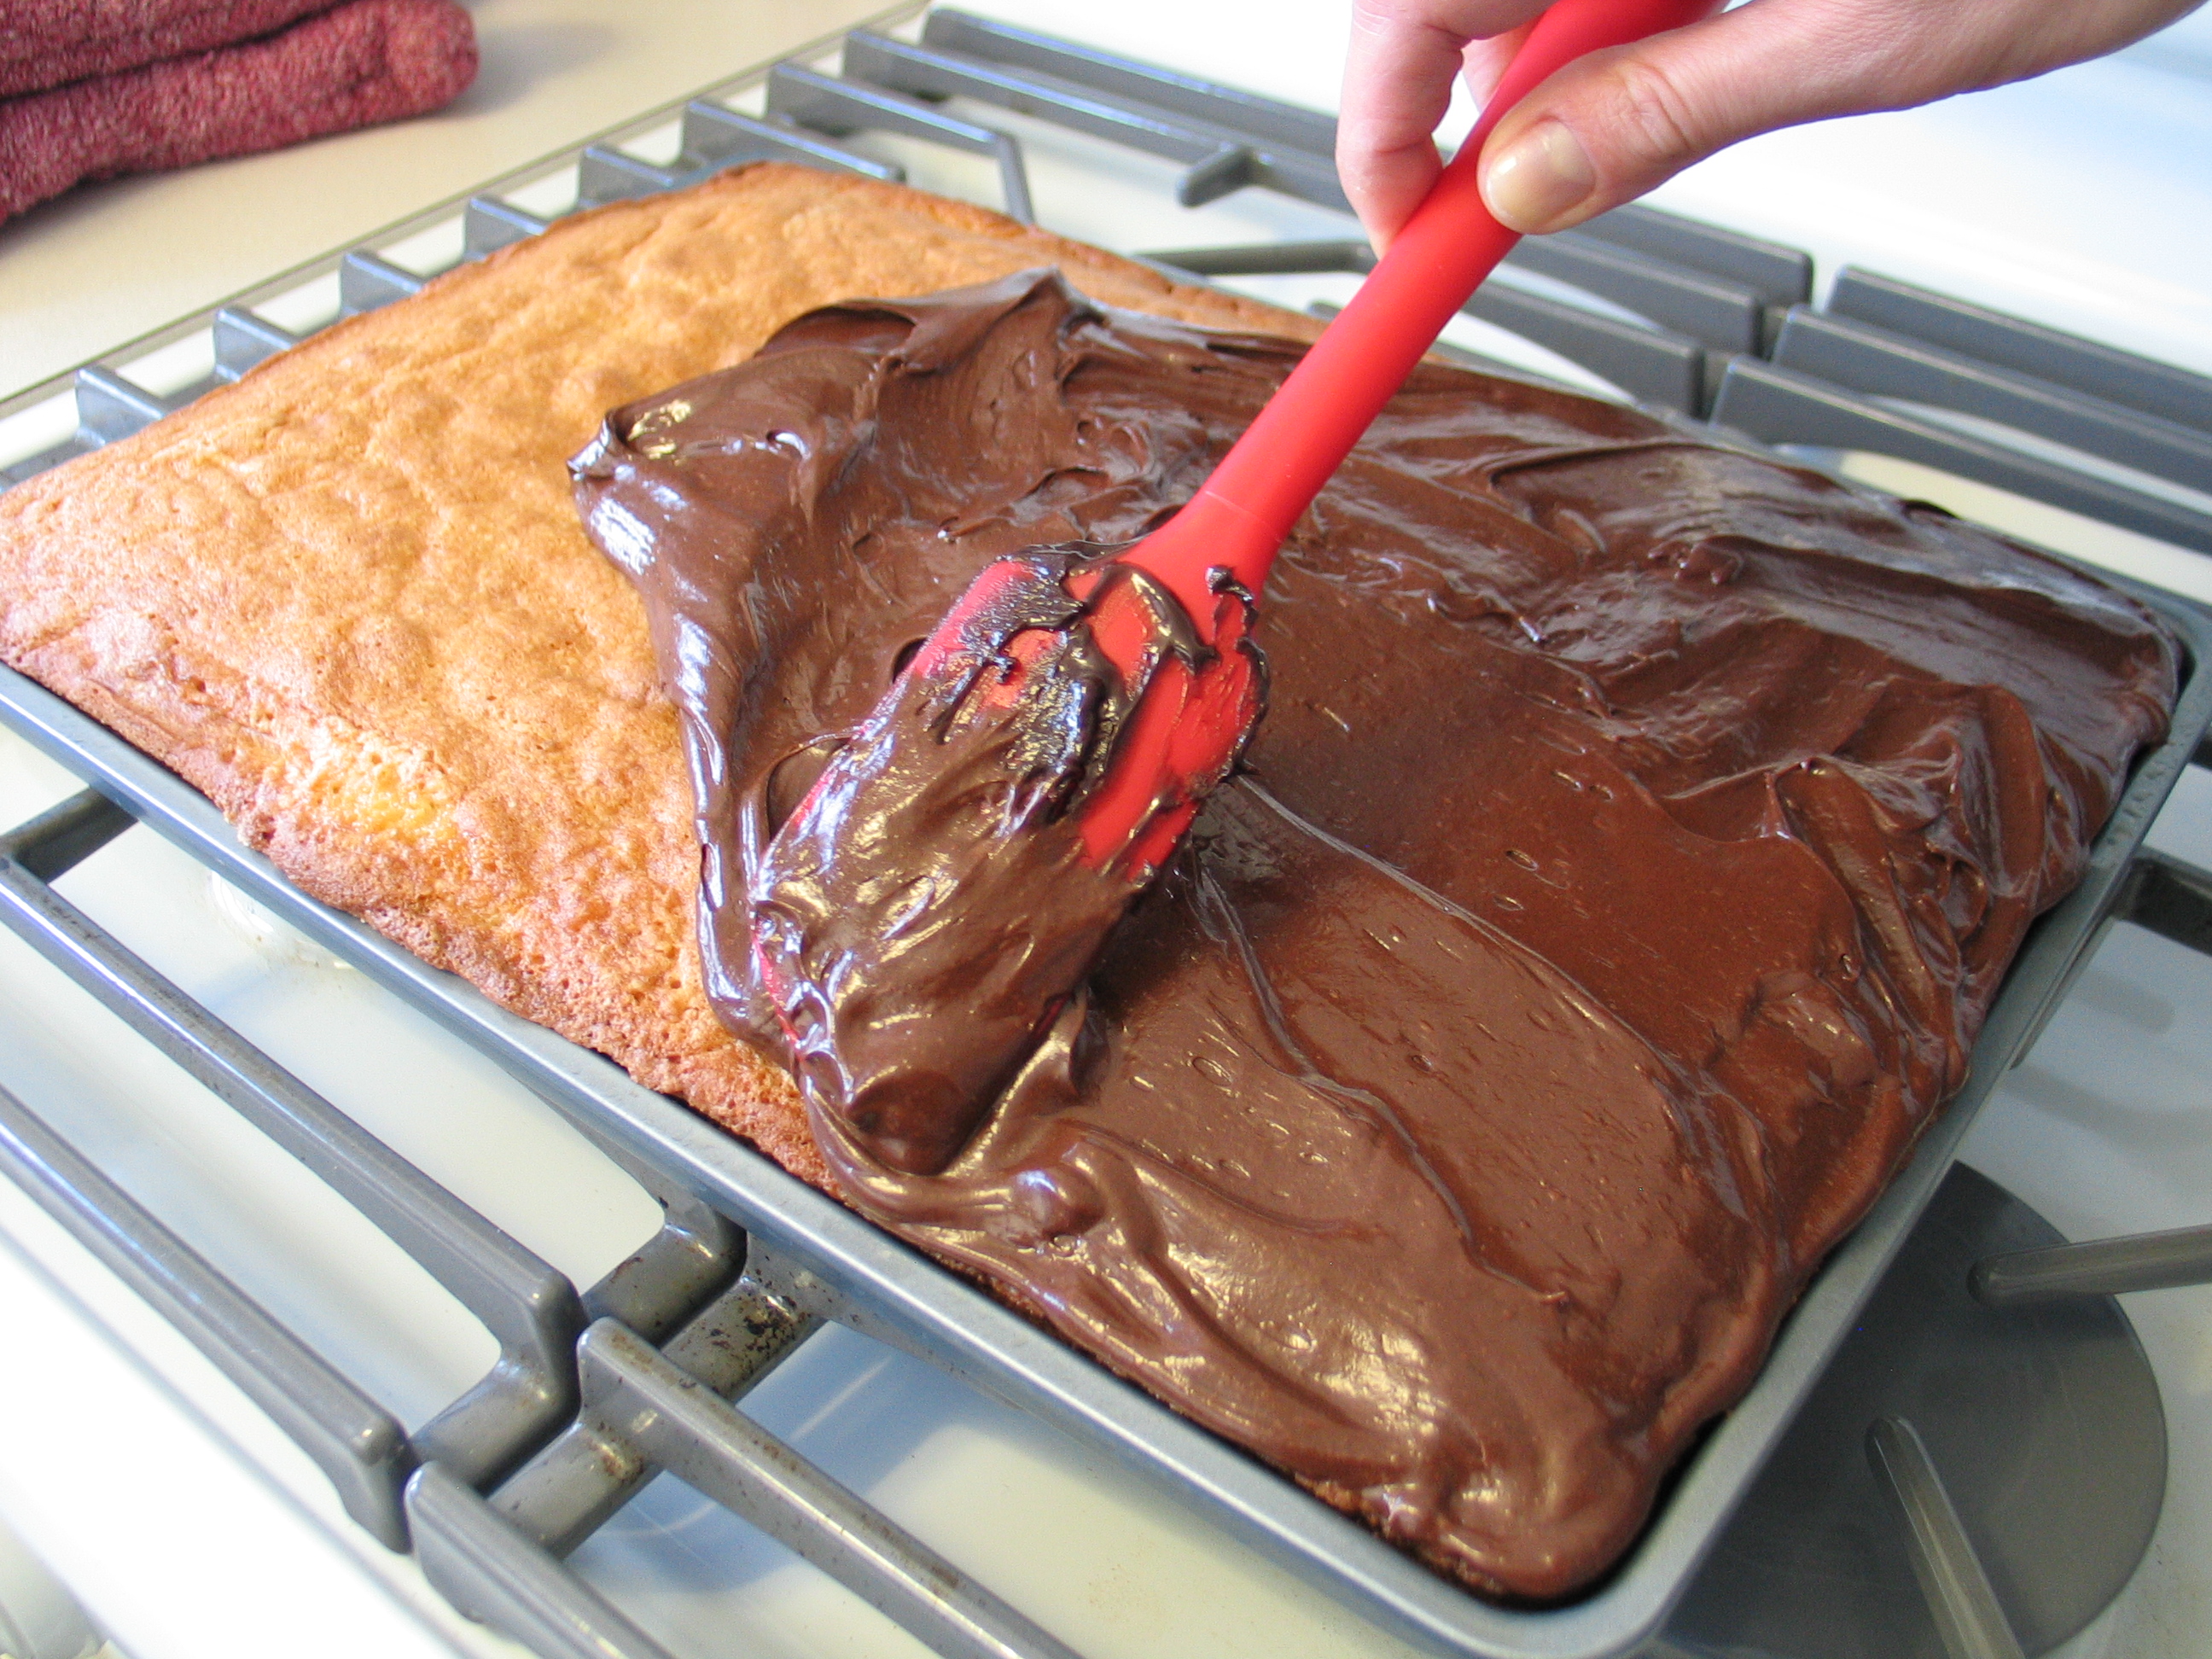 Sheet Cake with Chocolate Frosting